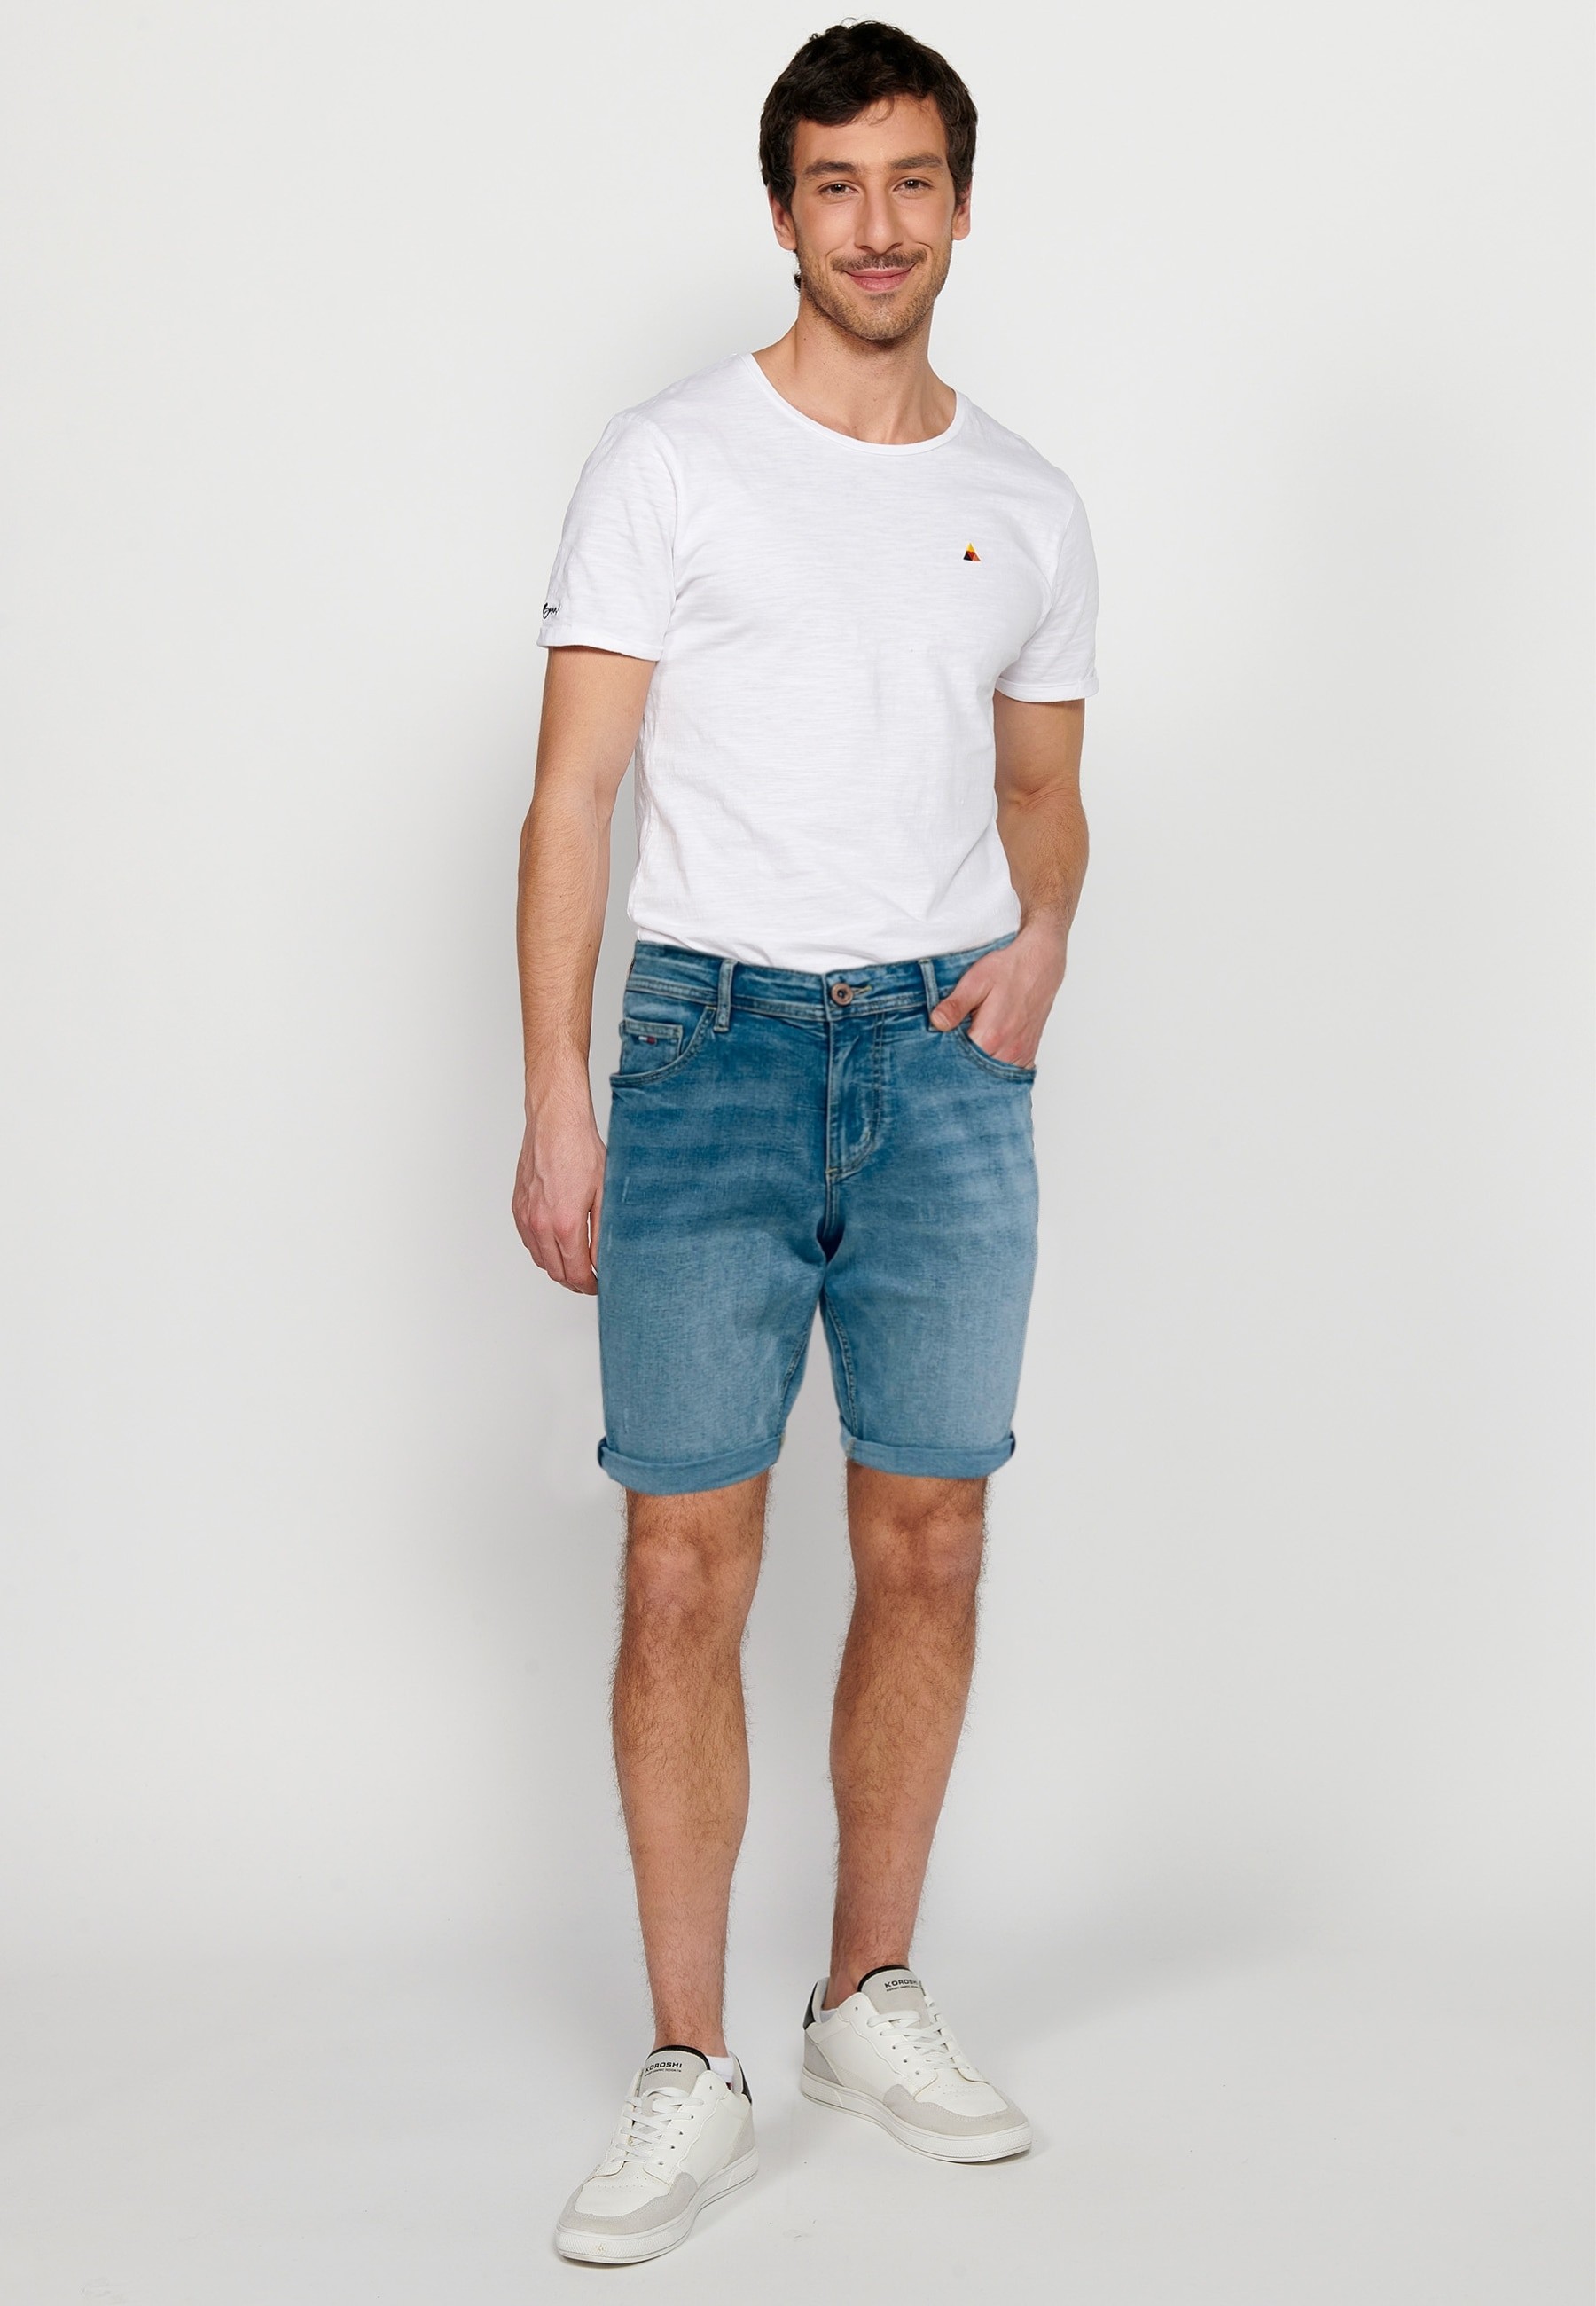 Denim Bermuda shorts with turn-up finish and front zipper and button closure with five pockets, one pocket pocket, in Blue for Men